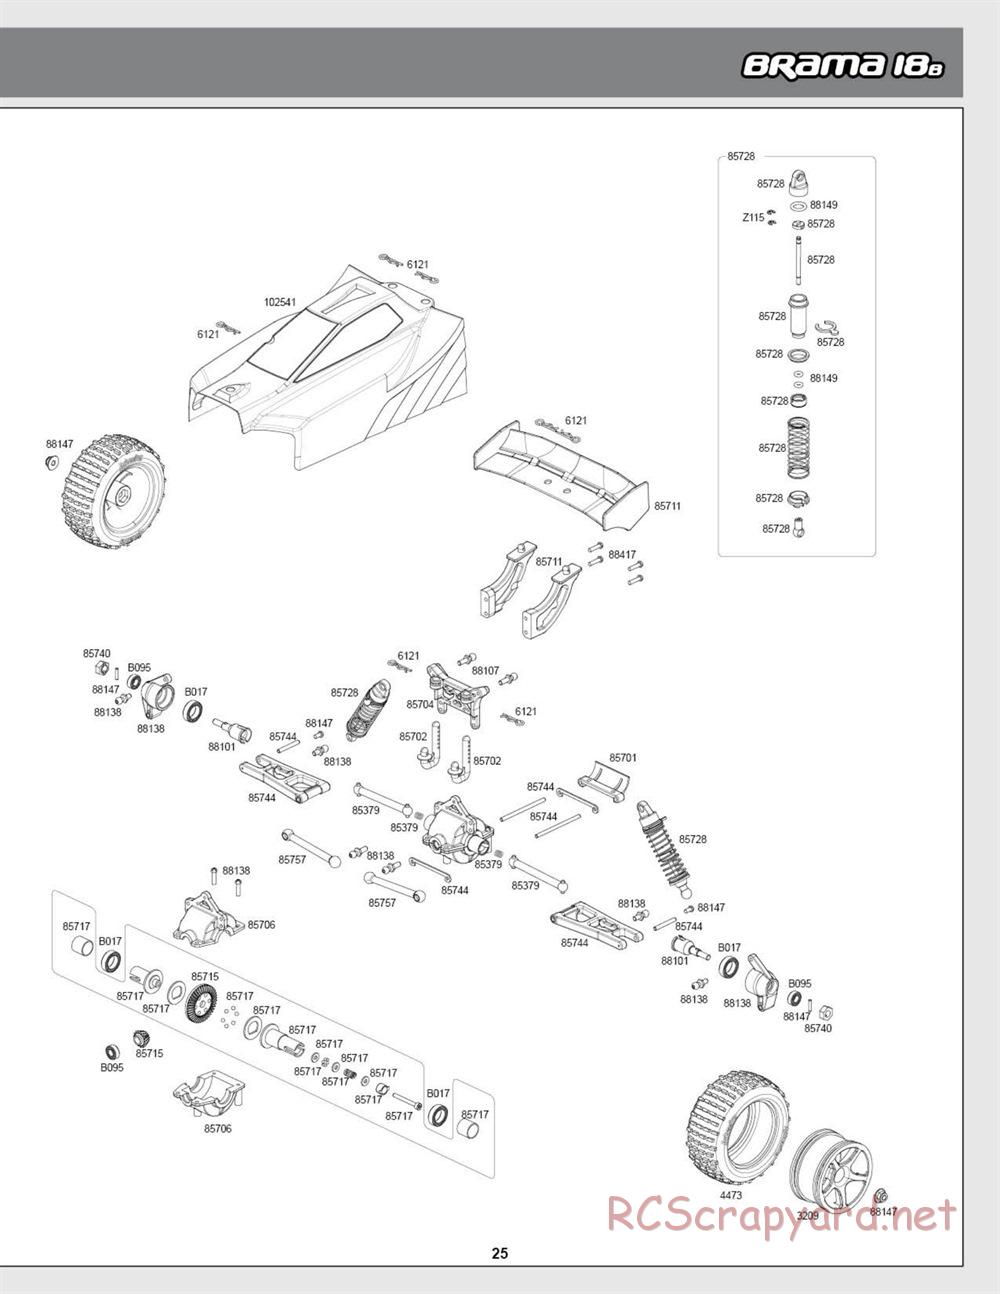 HPI - Brama 18B - Exploded View - Page 25